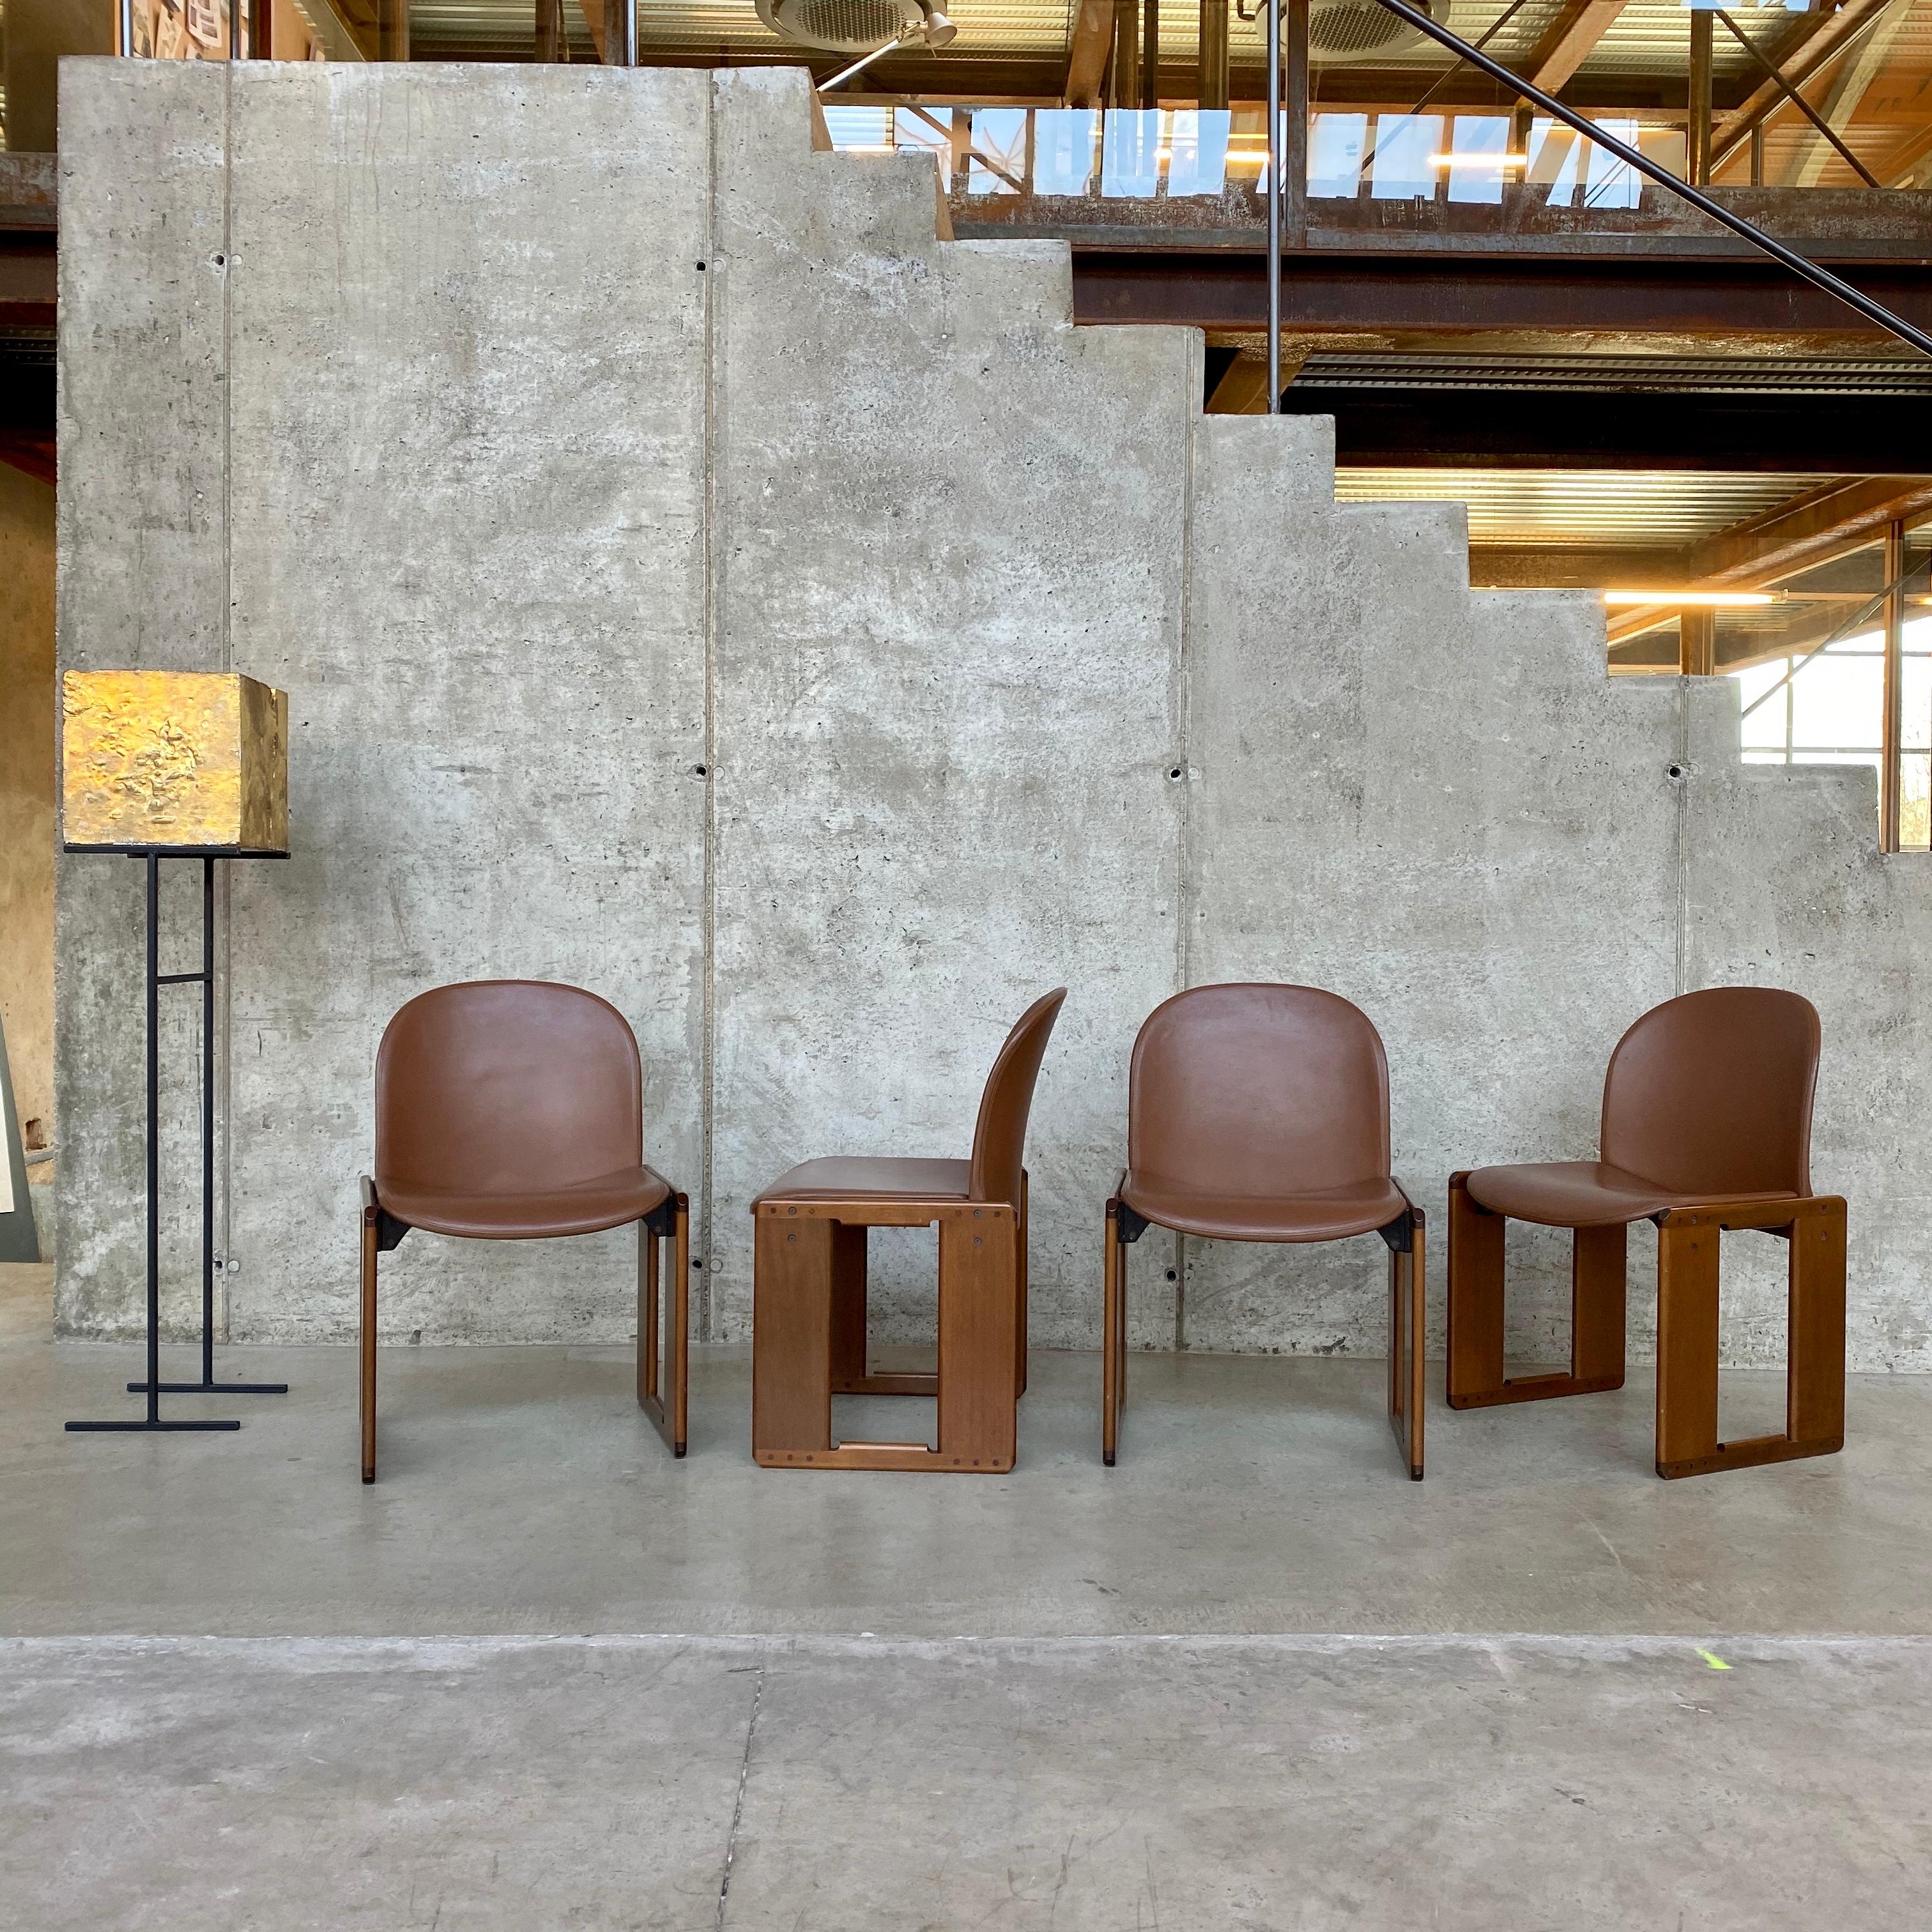 Afra & Tobia Scarpa “Dialogo” dining chairs for B&B Italia, 1974, set of 4.

Set of 4 